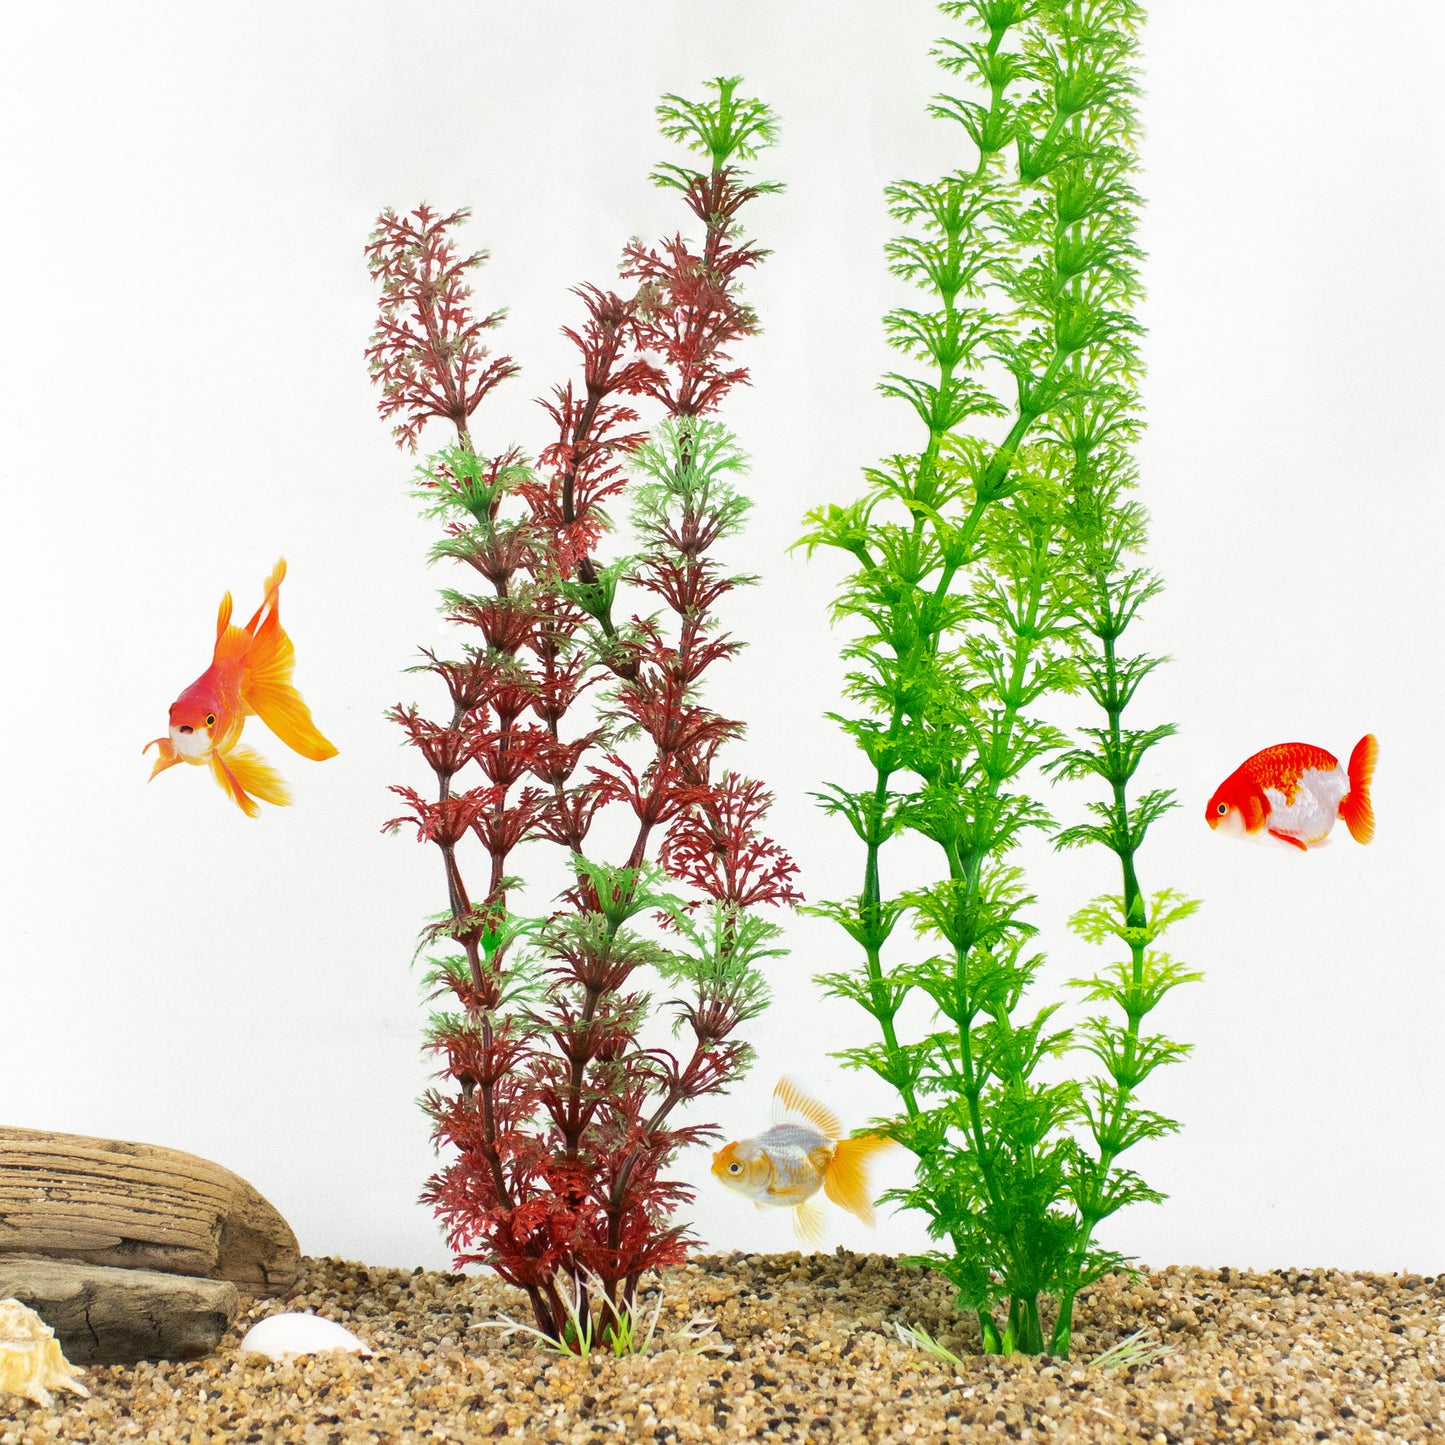 2 Piece Large Faux Fern Aquarium Plants - Red and Green - Purple and Orange